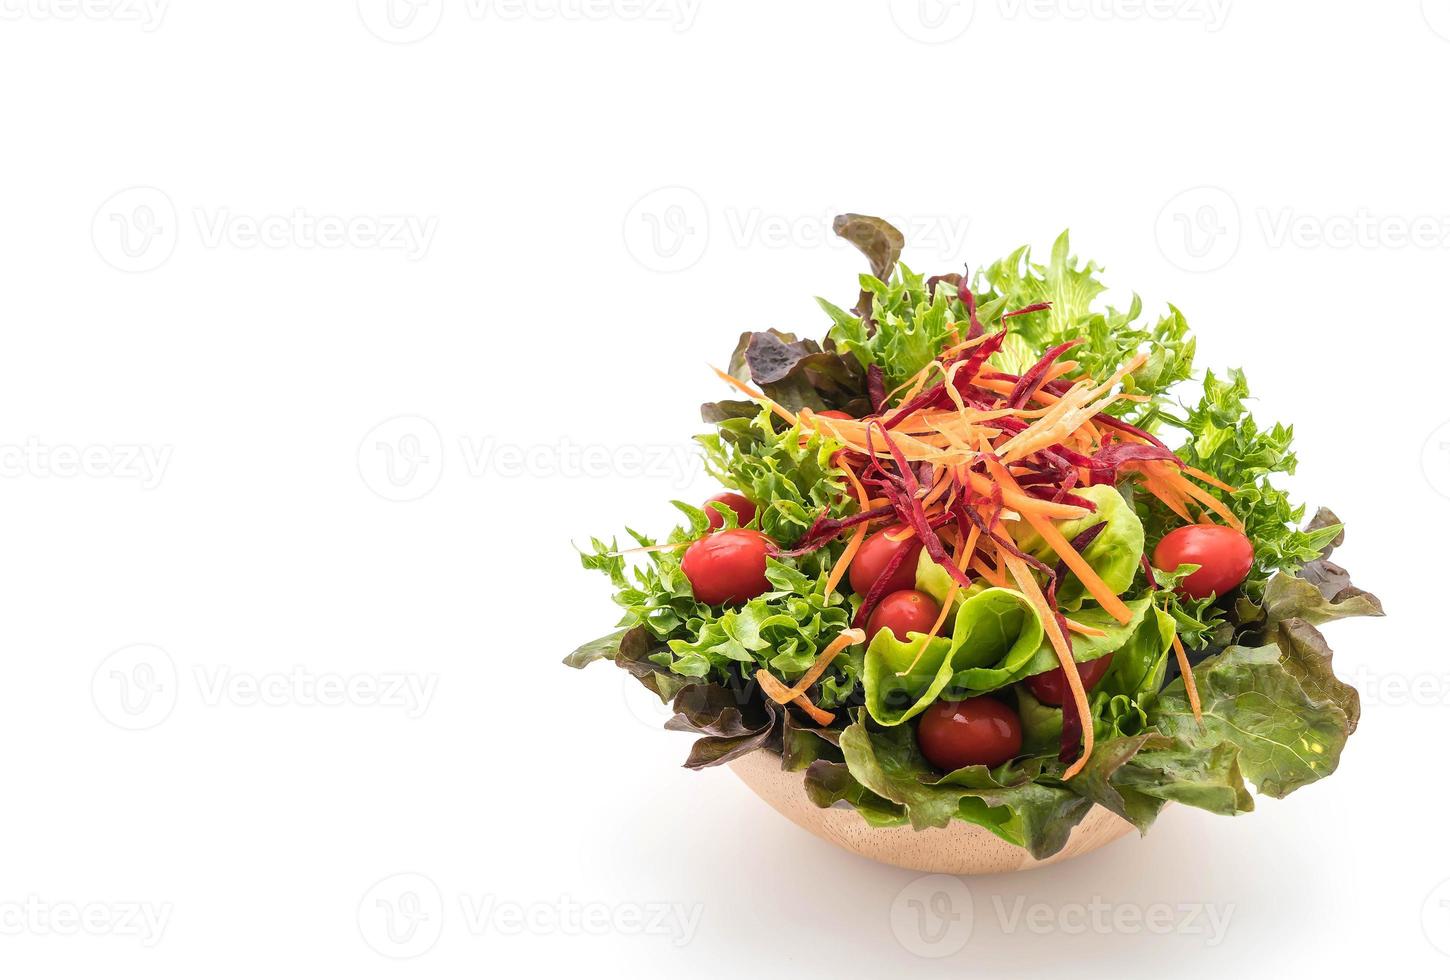 Mixed salad in wood bowl on white background photo